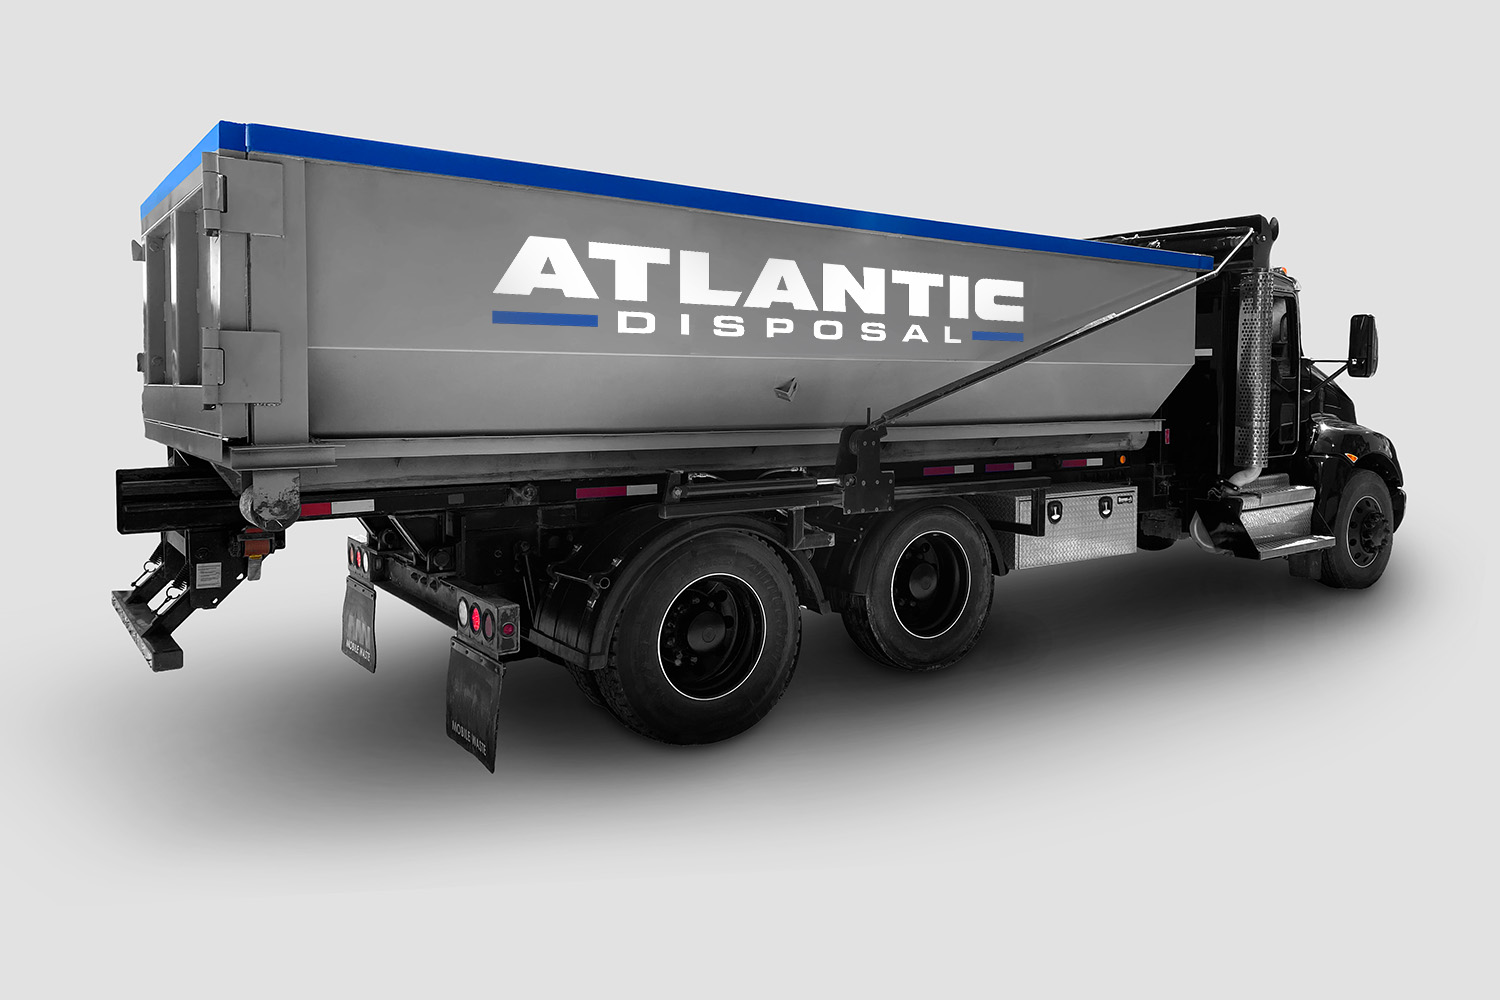 Atlantic Disposal roll-off dumpster rental delivery truck